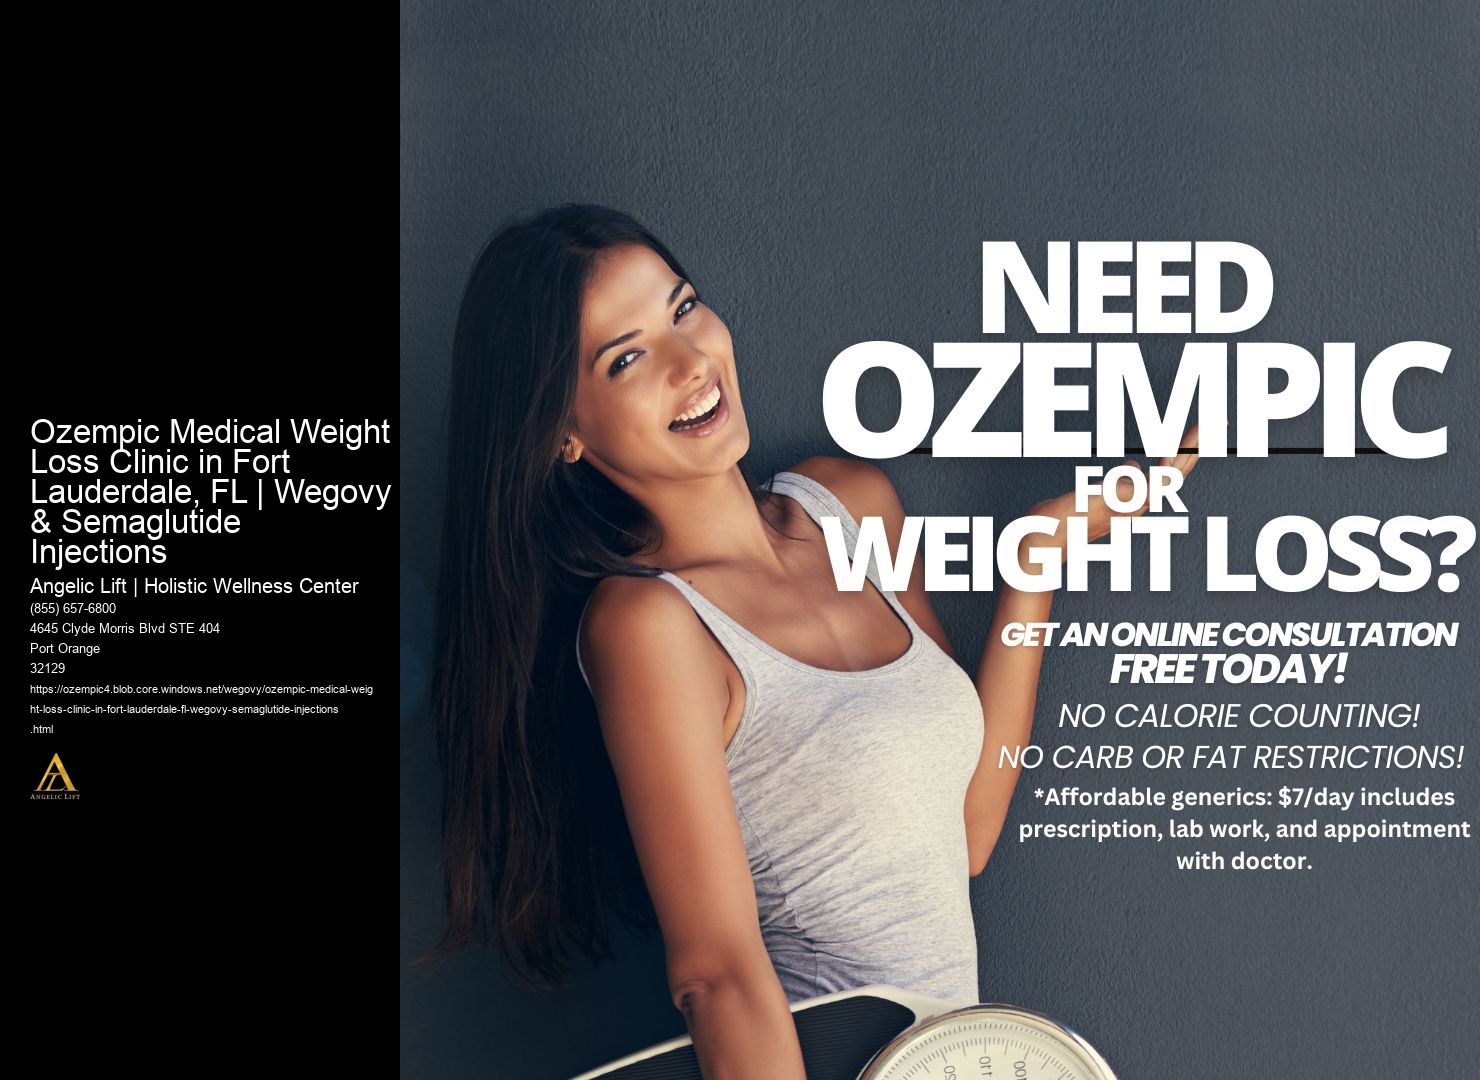 Ozempic Medical Weight Loss Clinic in Fort Lauderdale, FL | Wegovy & Semaglutide Injections